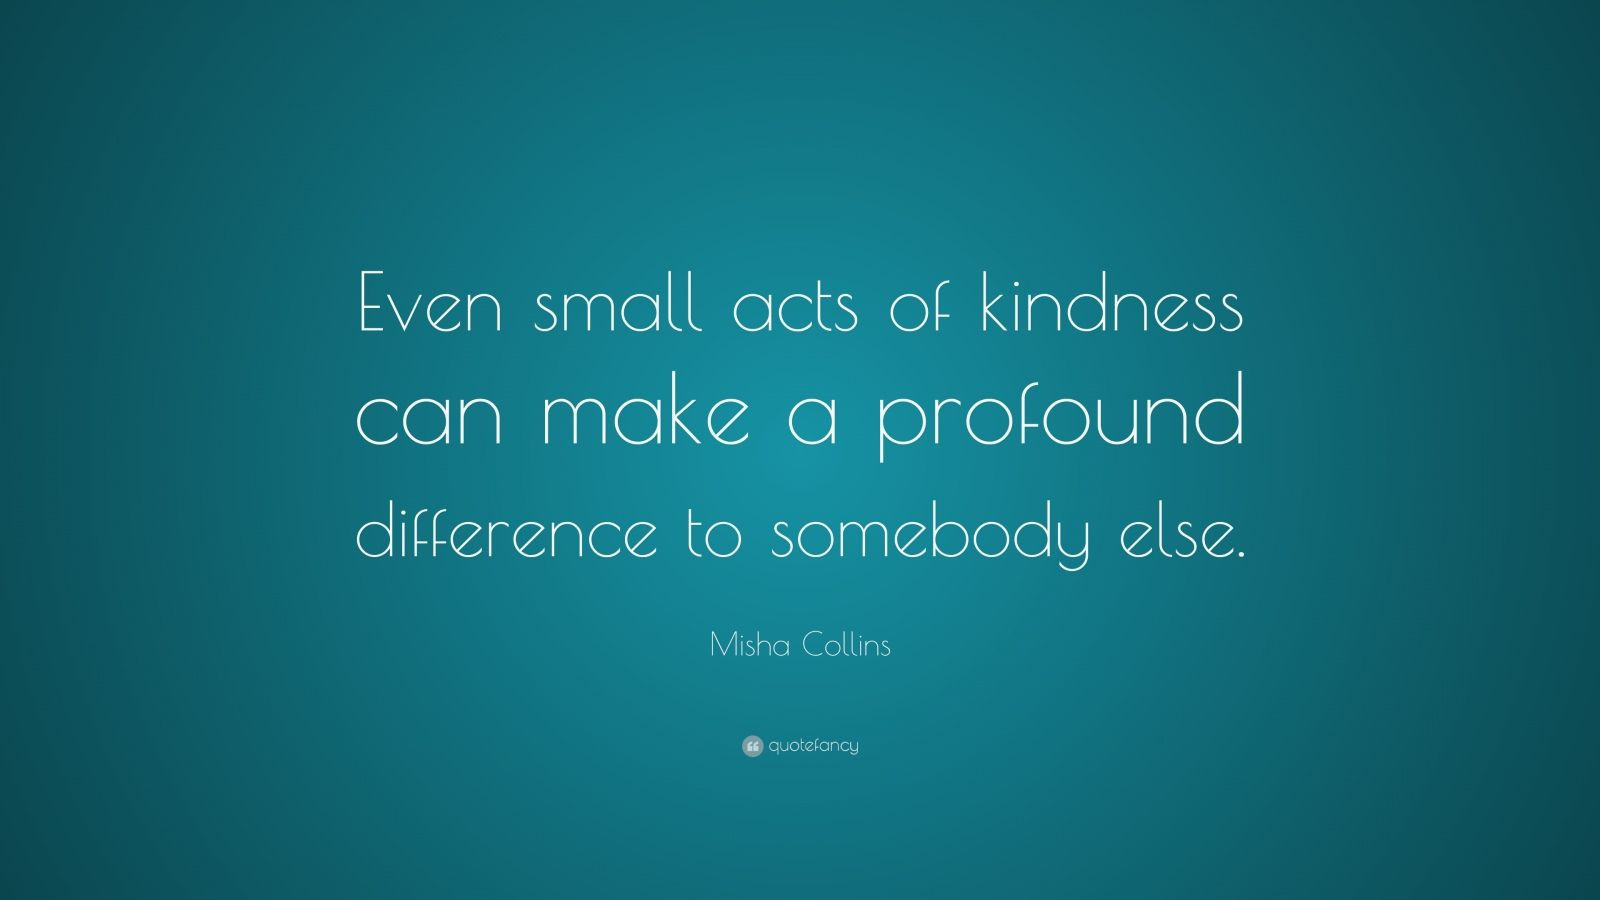 Small Acts Of Kindness Quotes
 Misha Collins Quote “Even small acts of kindness can make